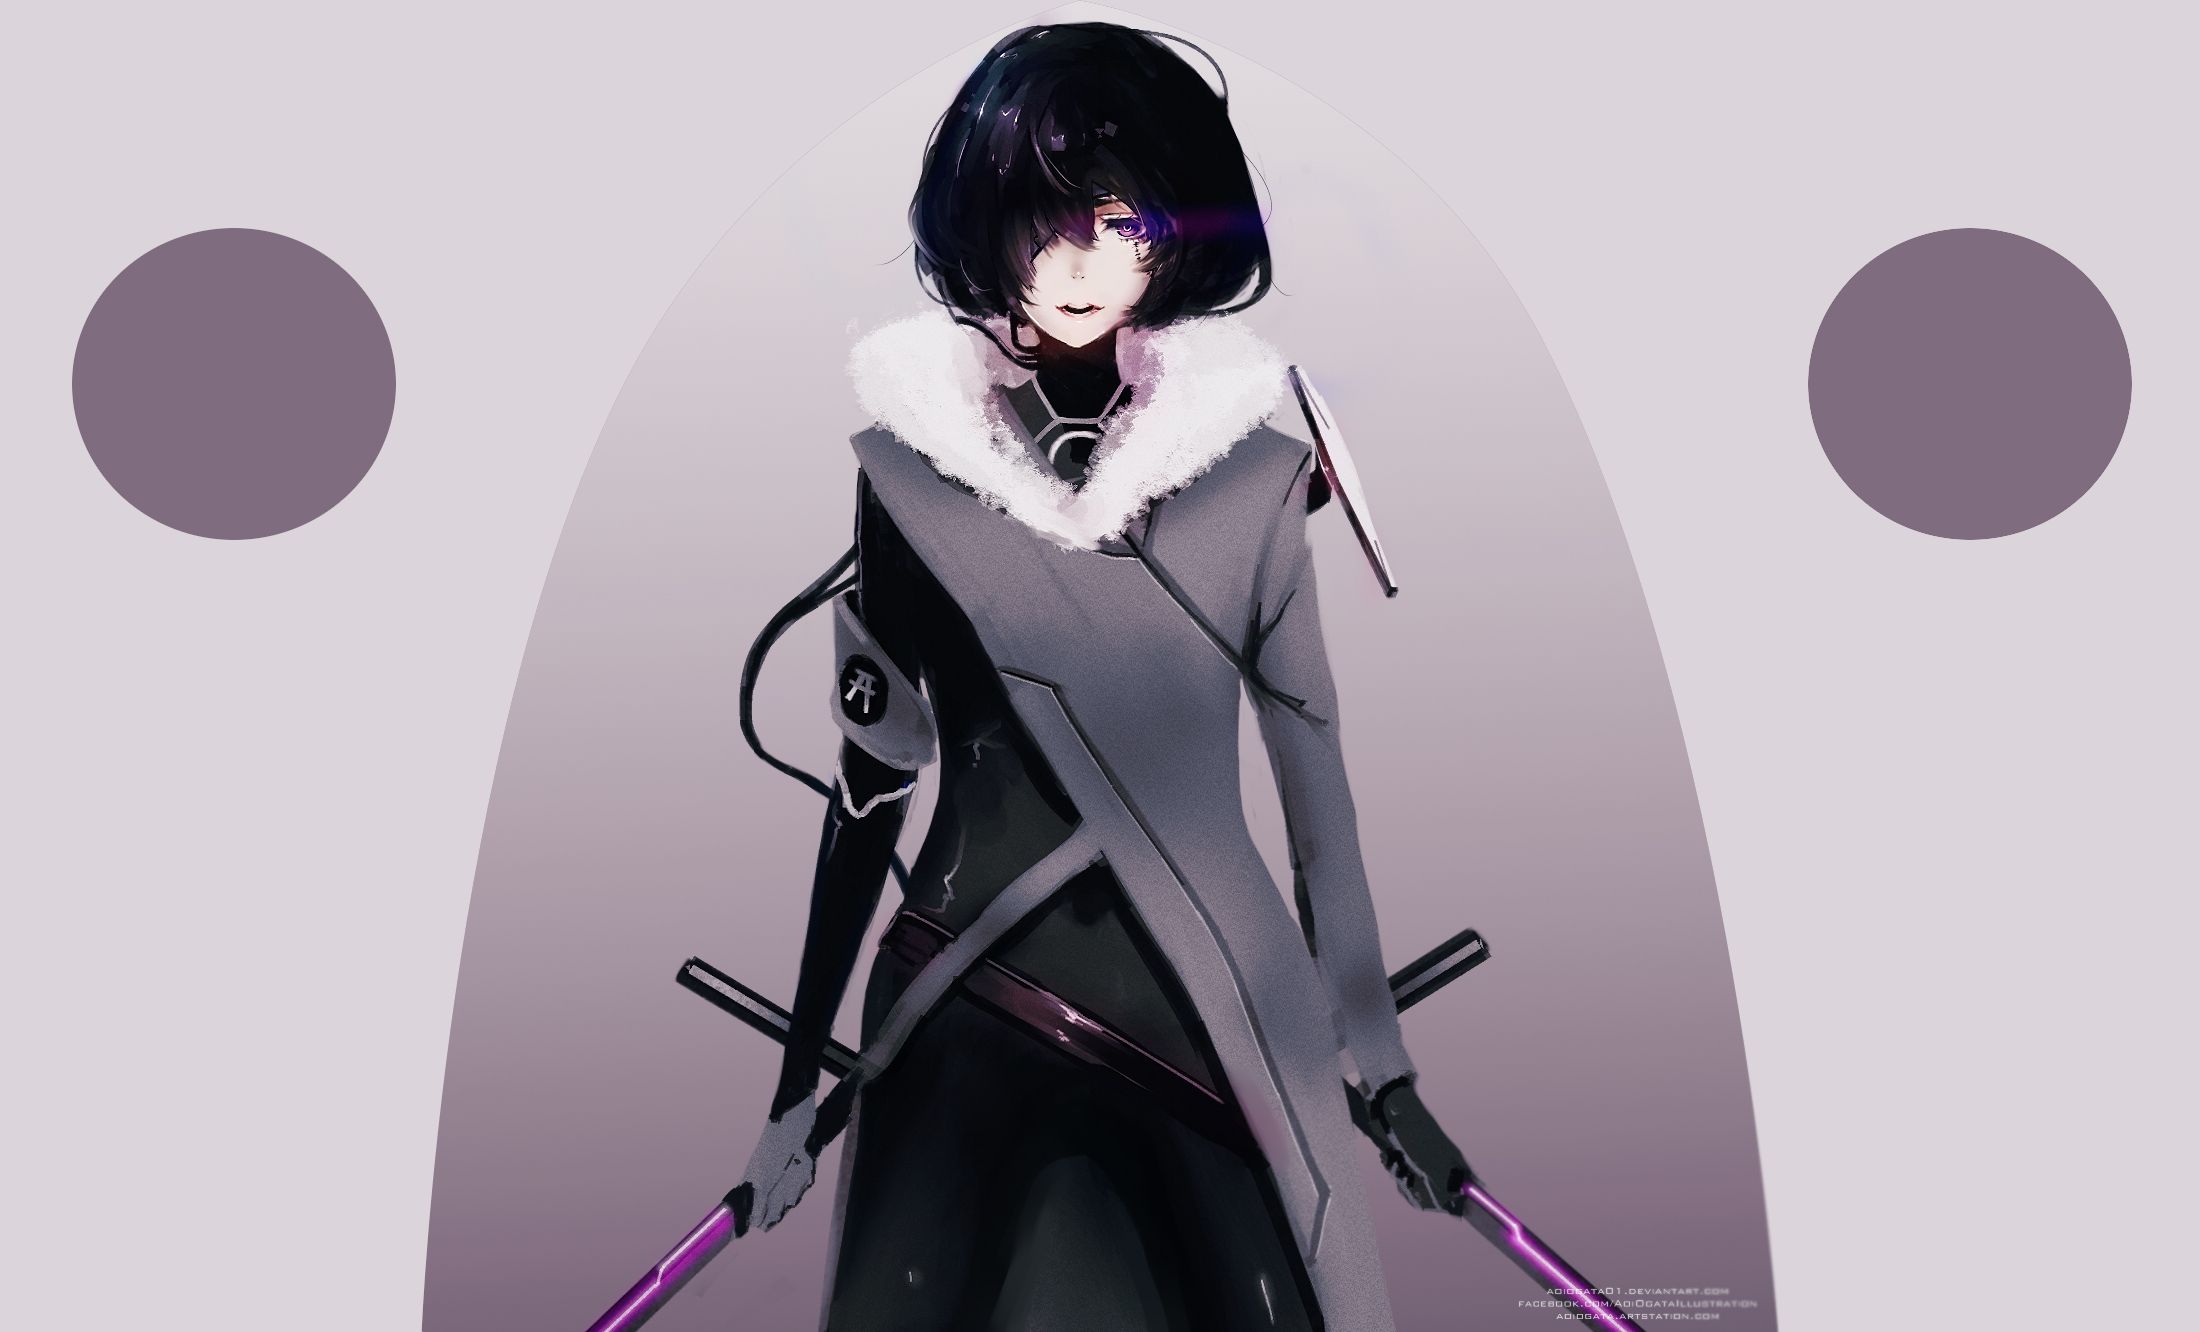 anime girl with short black hair and sword